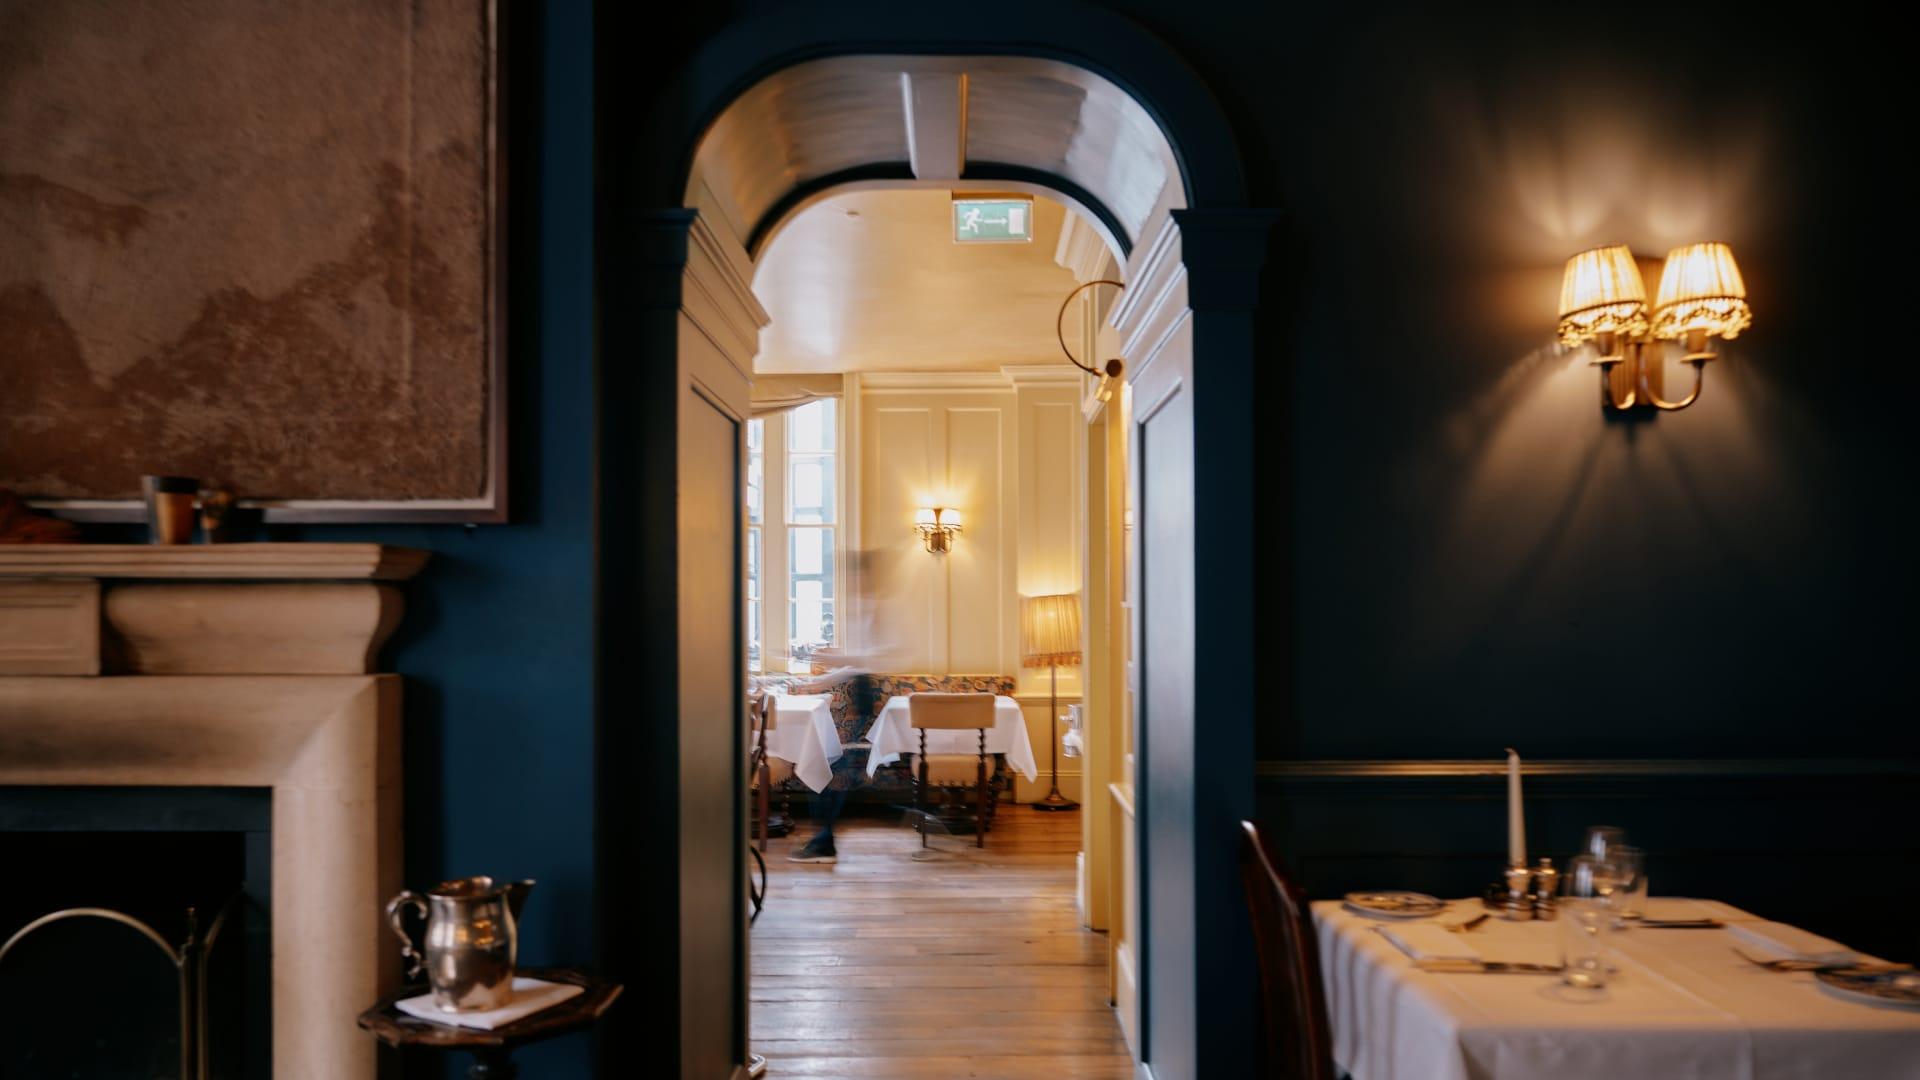 Photograph of an editorial-styled shot. The image features an internal hall archway in rich navy, with a set table featuring a white tablecloth and silverware on the right. Through the doorway you can see a mustard armchair and a small table with a white tablecloth.